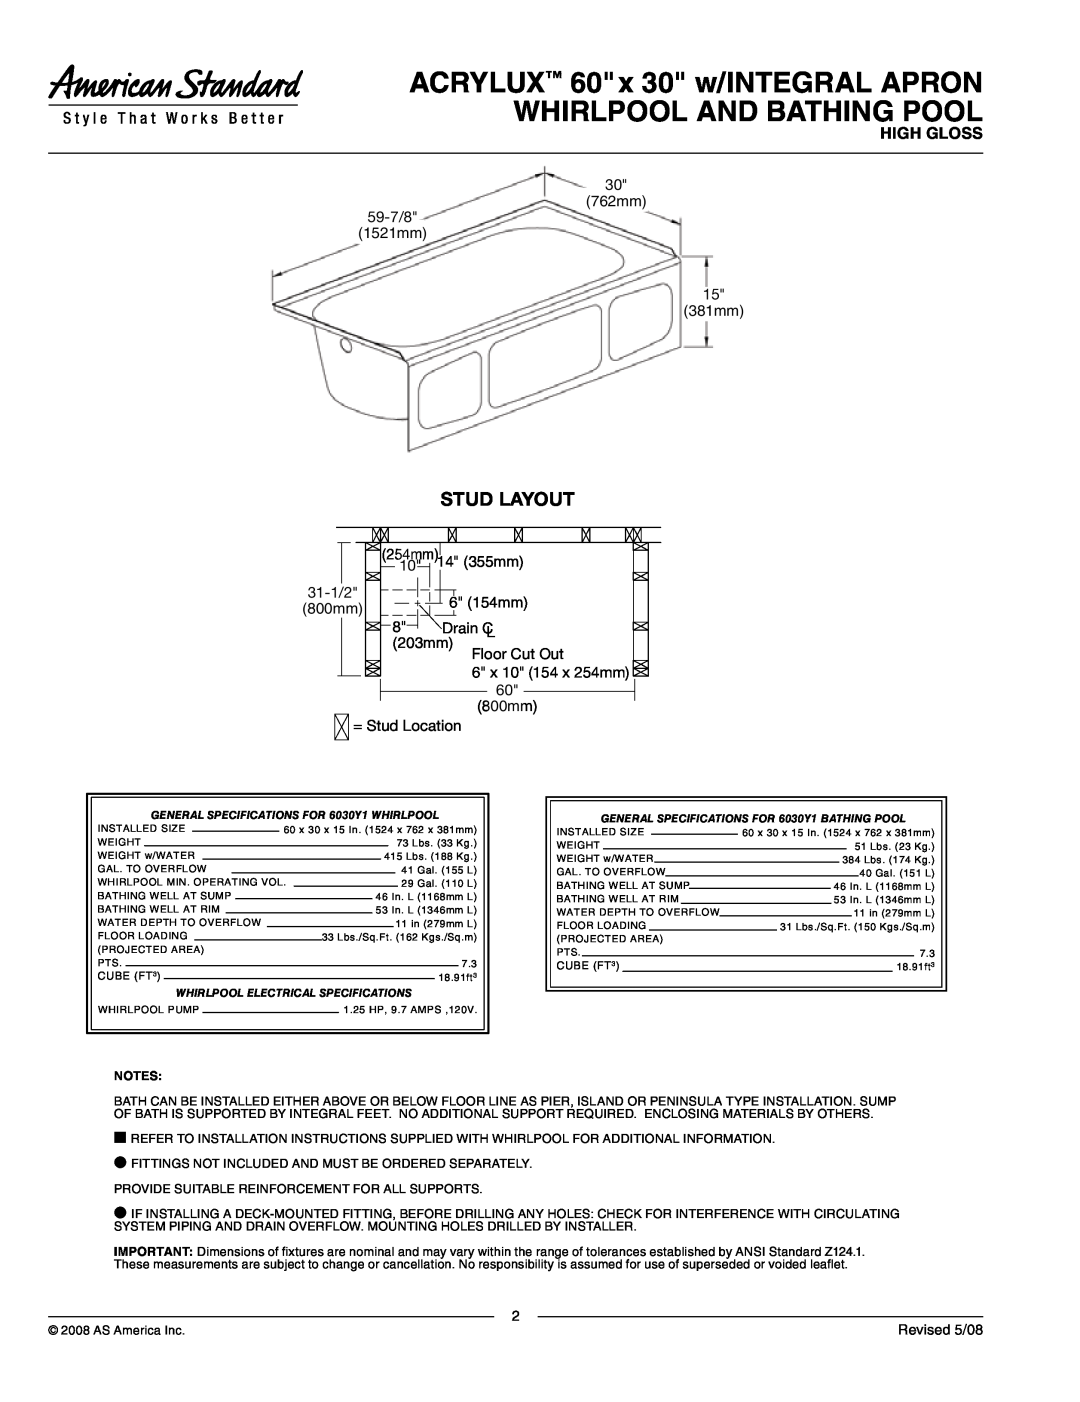 American Standard 6030Y.BWT manual ACRYLUX 60 x 30 w/INTEGRAL APRON, Whirlpool And Bathing Pool, Stud Layout, High Gloss 